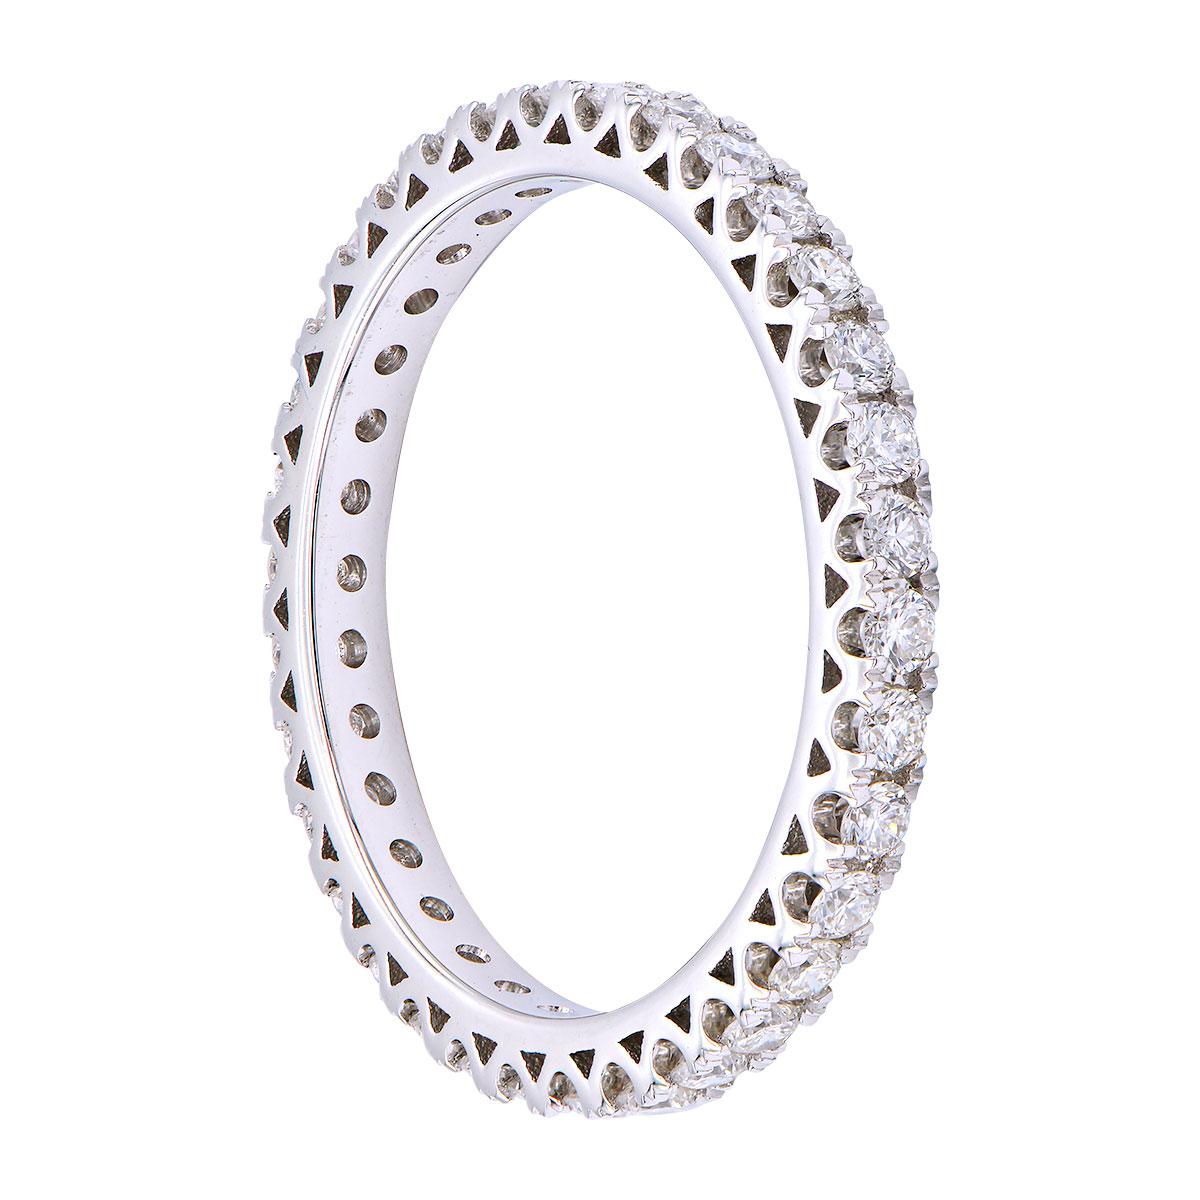 This gorgeous diamond eternity band has 33 round VS2, G color diamonds totaling 0.60 carats. They are set in 1.8 grams of 18 karat white gold. The width of the ring is 2.2mm. The gold prongs add a beautiful detail from the sides and it has a smooth